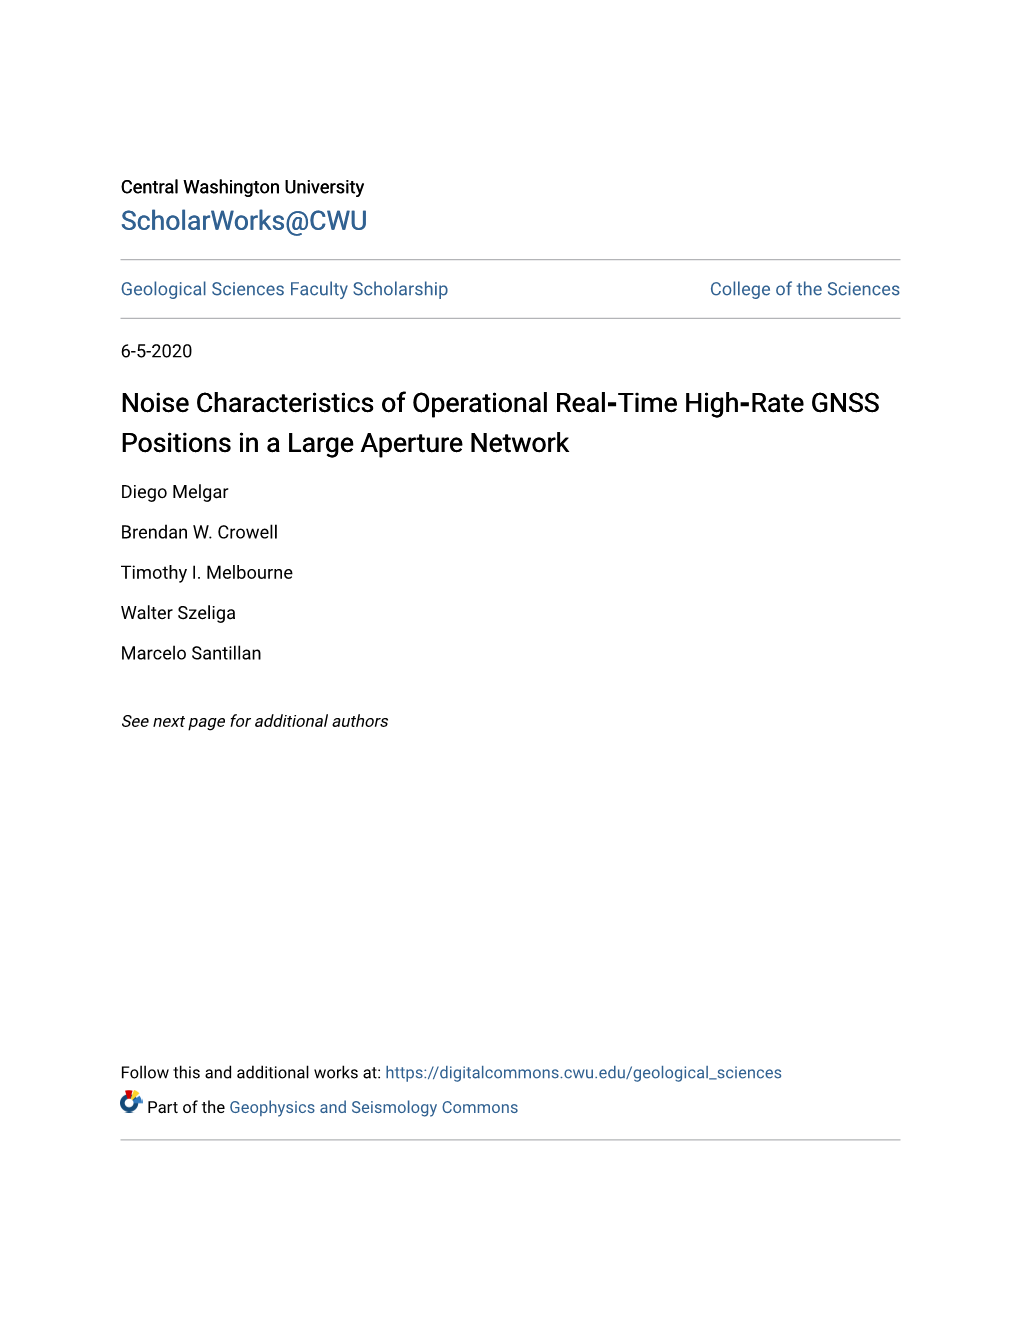 Noise Characteristics of Operational Real‐Time High‐Rate GNSS Positions in a Large Aperture Network